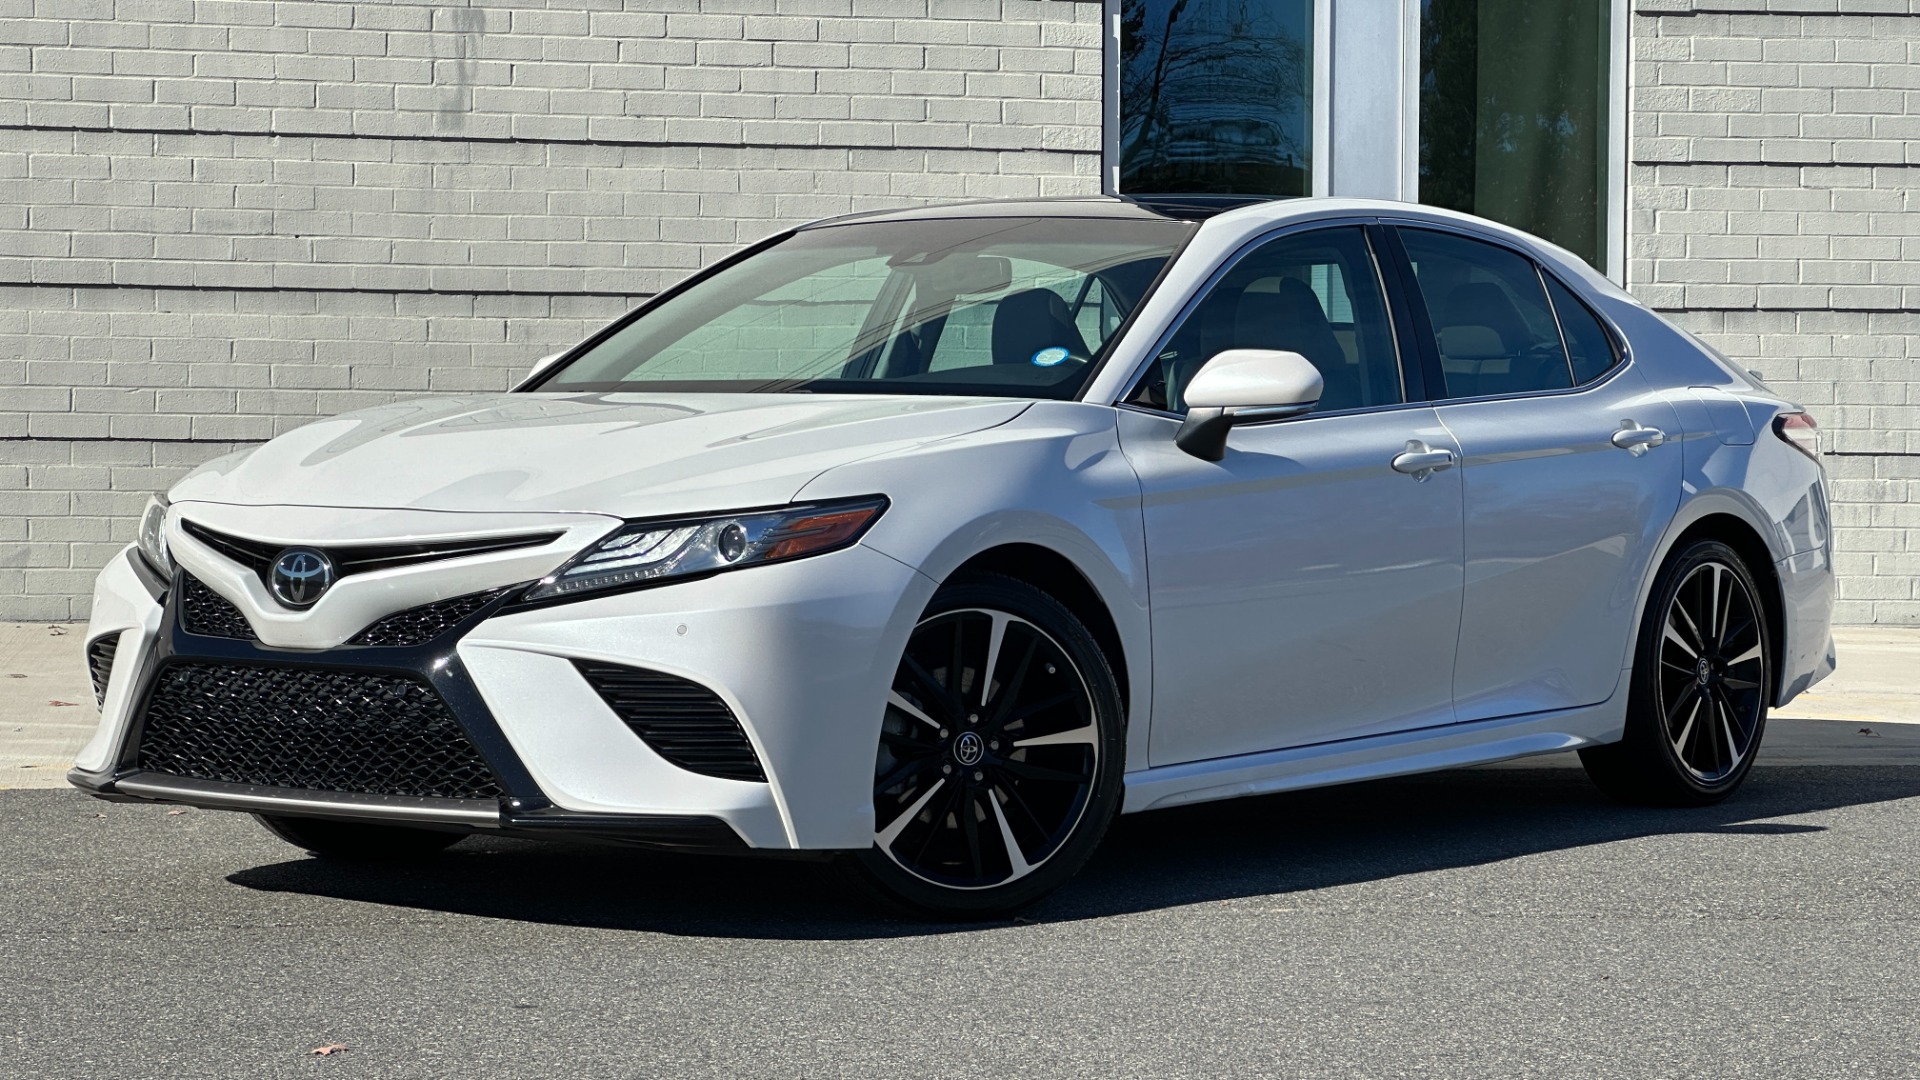 Used 2018 Toyota Camry XSE / PANORAMIC ROOF / ENTUNE / HEATED SEATS / BACKUP CAMERA for sale Sold at Formula Imports in Charlotte NC 28227 1